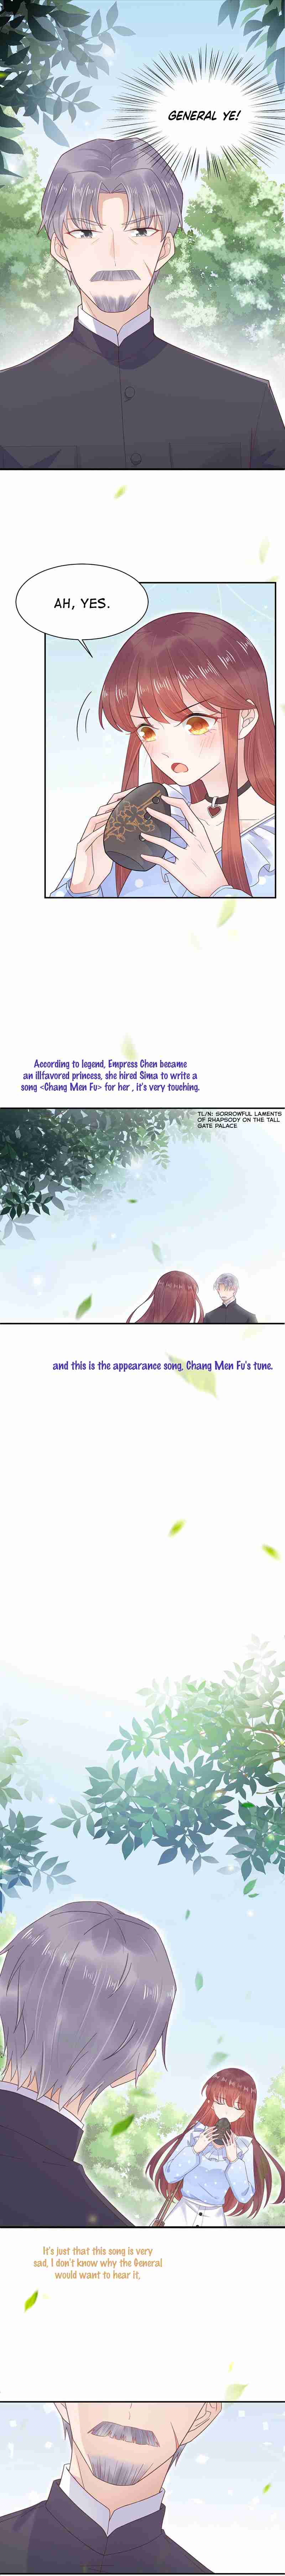 Blossoming Sweet Love Ch. 14 The plan failed?